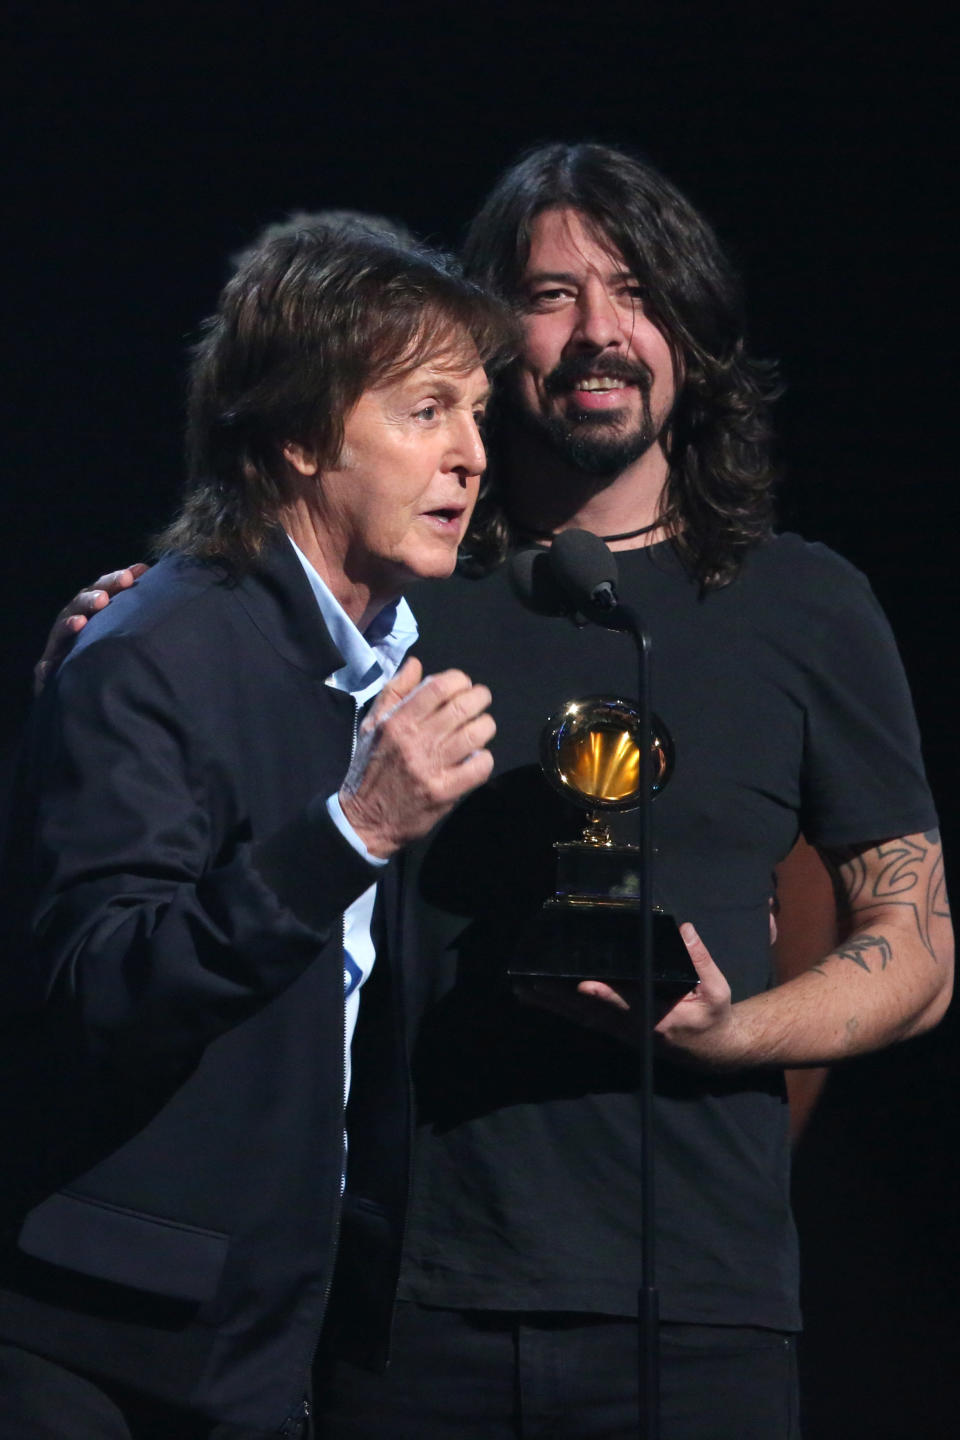 Paul McCartney, left, and Dave Grohl, accept the award for best rock song for Cut Me Some Slack" at the 56th annual Grammy Awards at Staples Center on Sunday, Jan. 26, 2014, in Los Angeles. (Photo by Matt Sayles/Invision/AP)